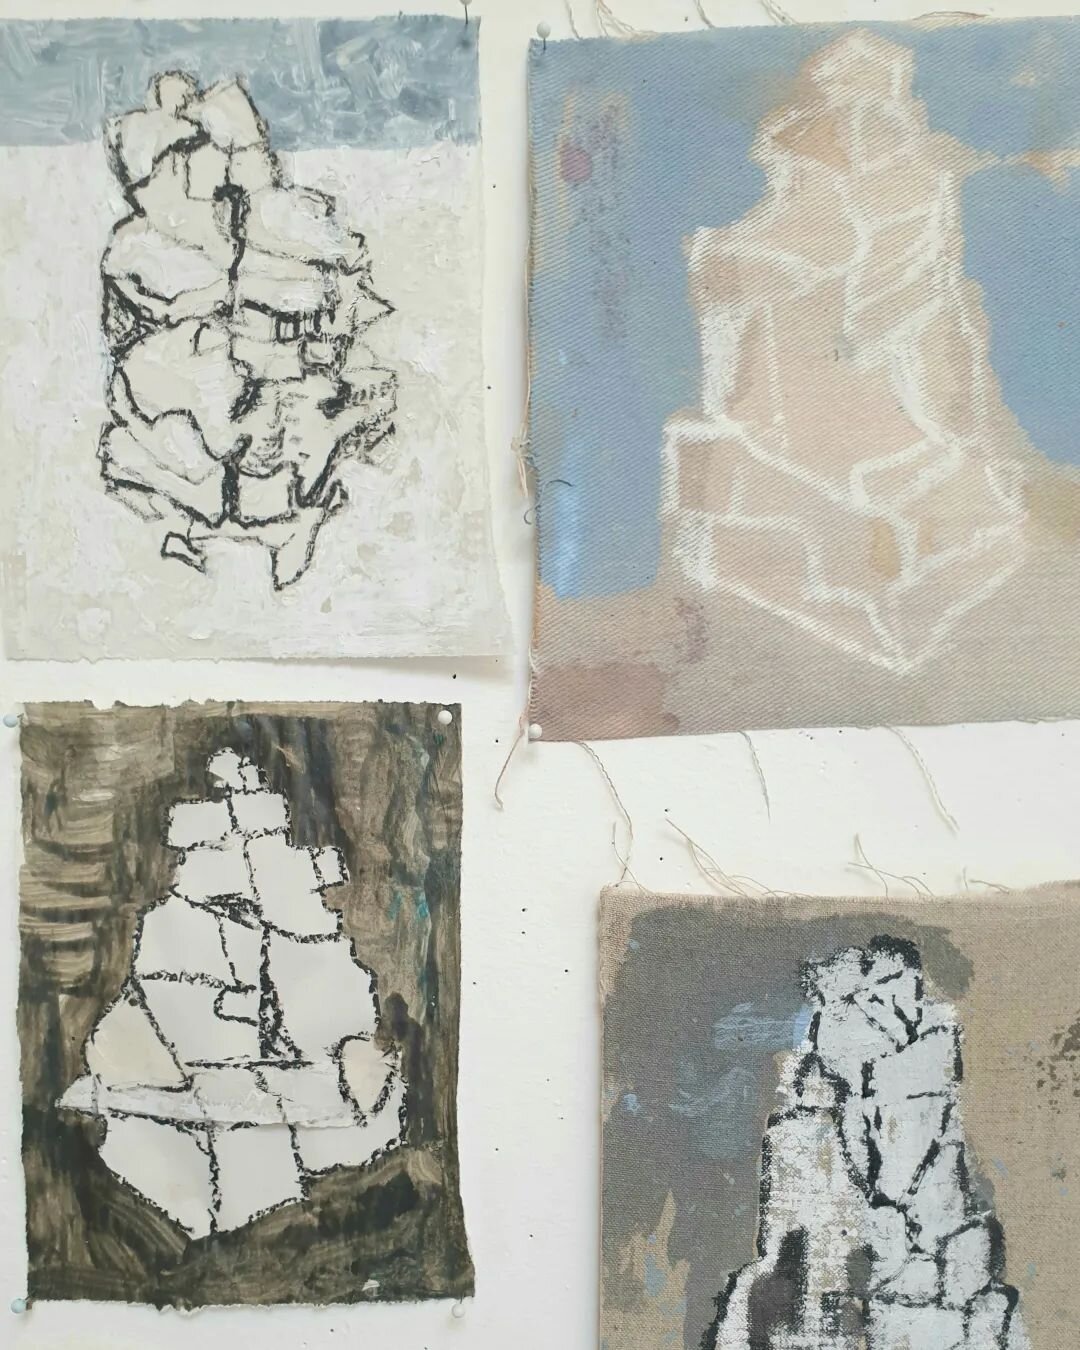 Cairn drawings on the wall